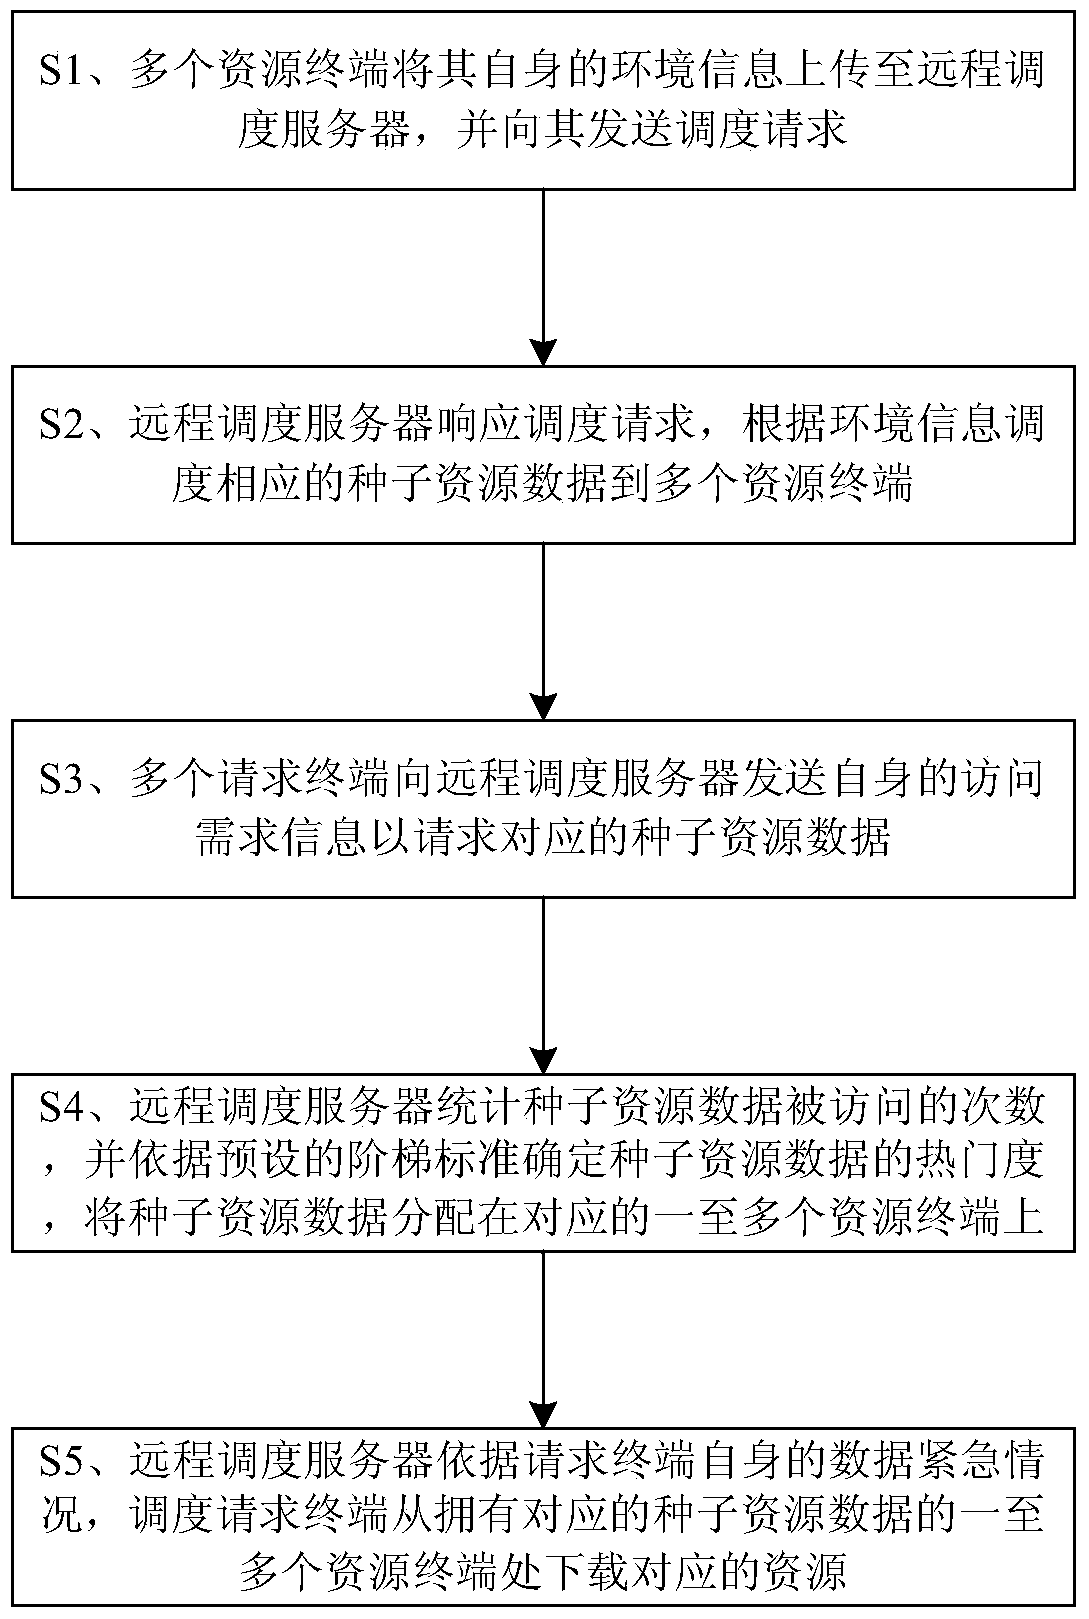 A resource scheduling method and system